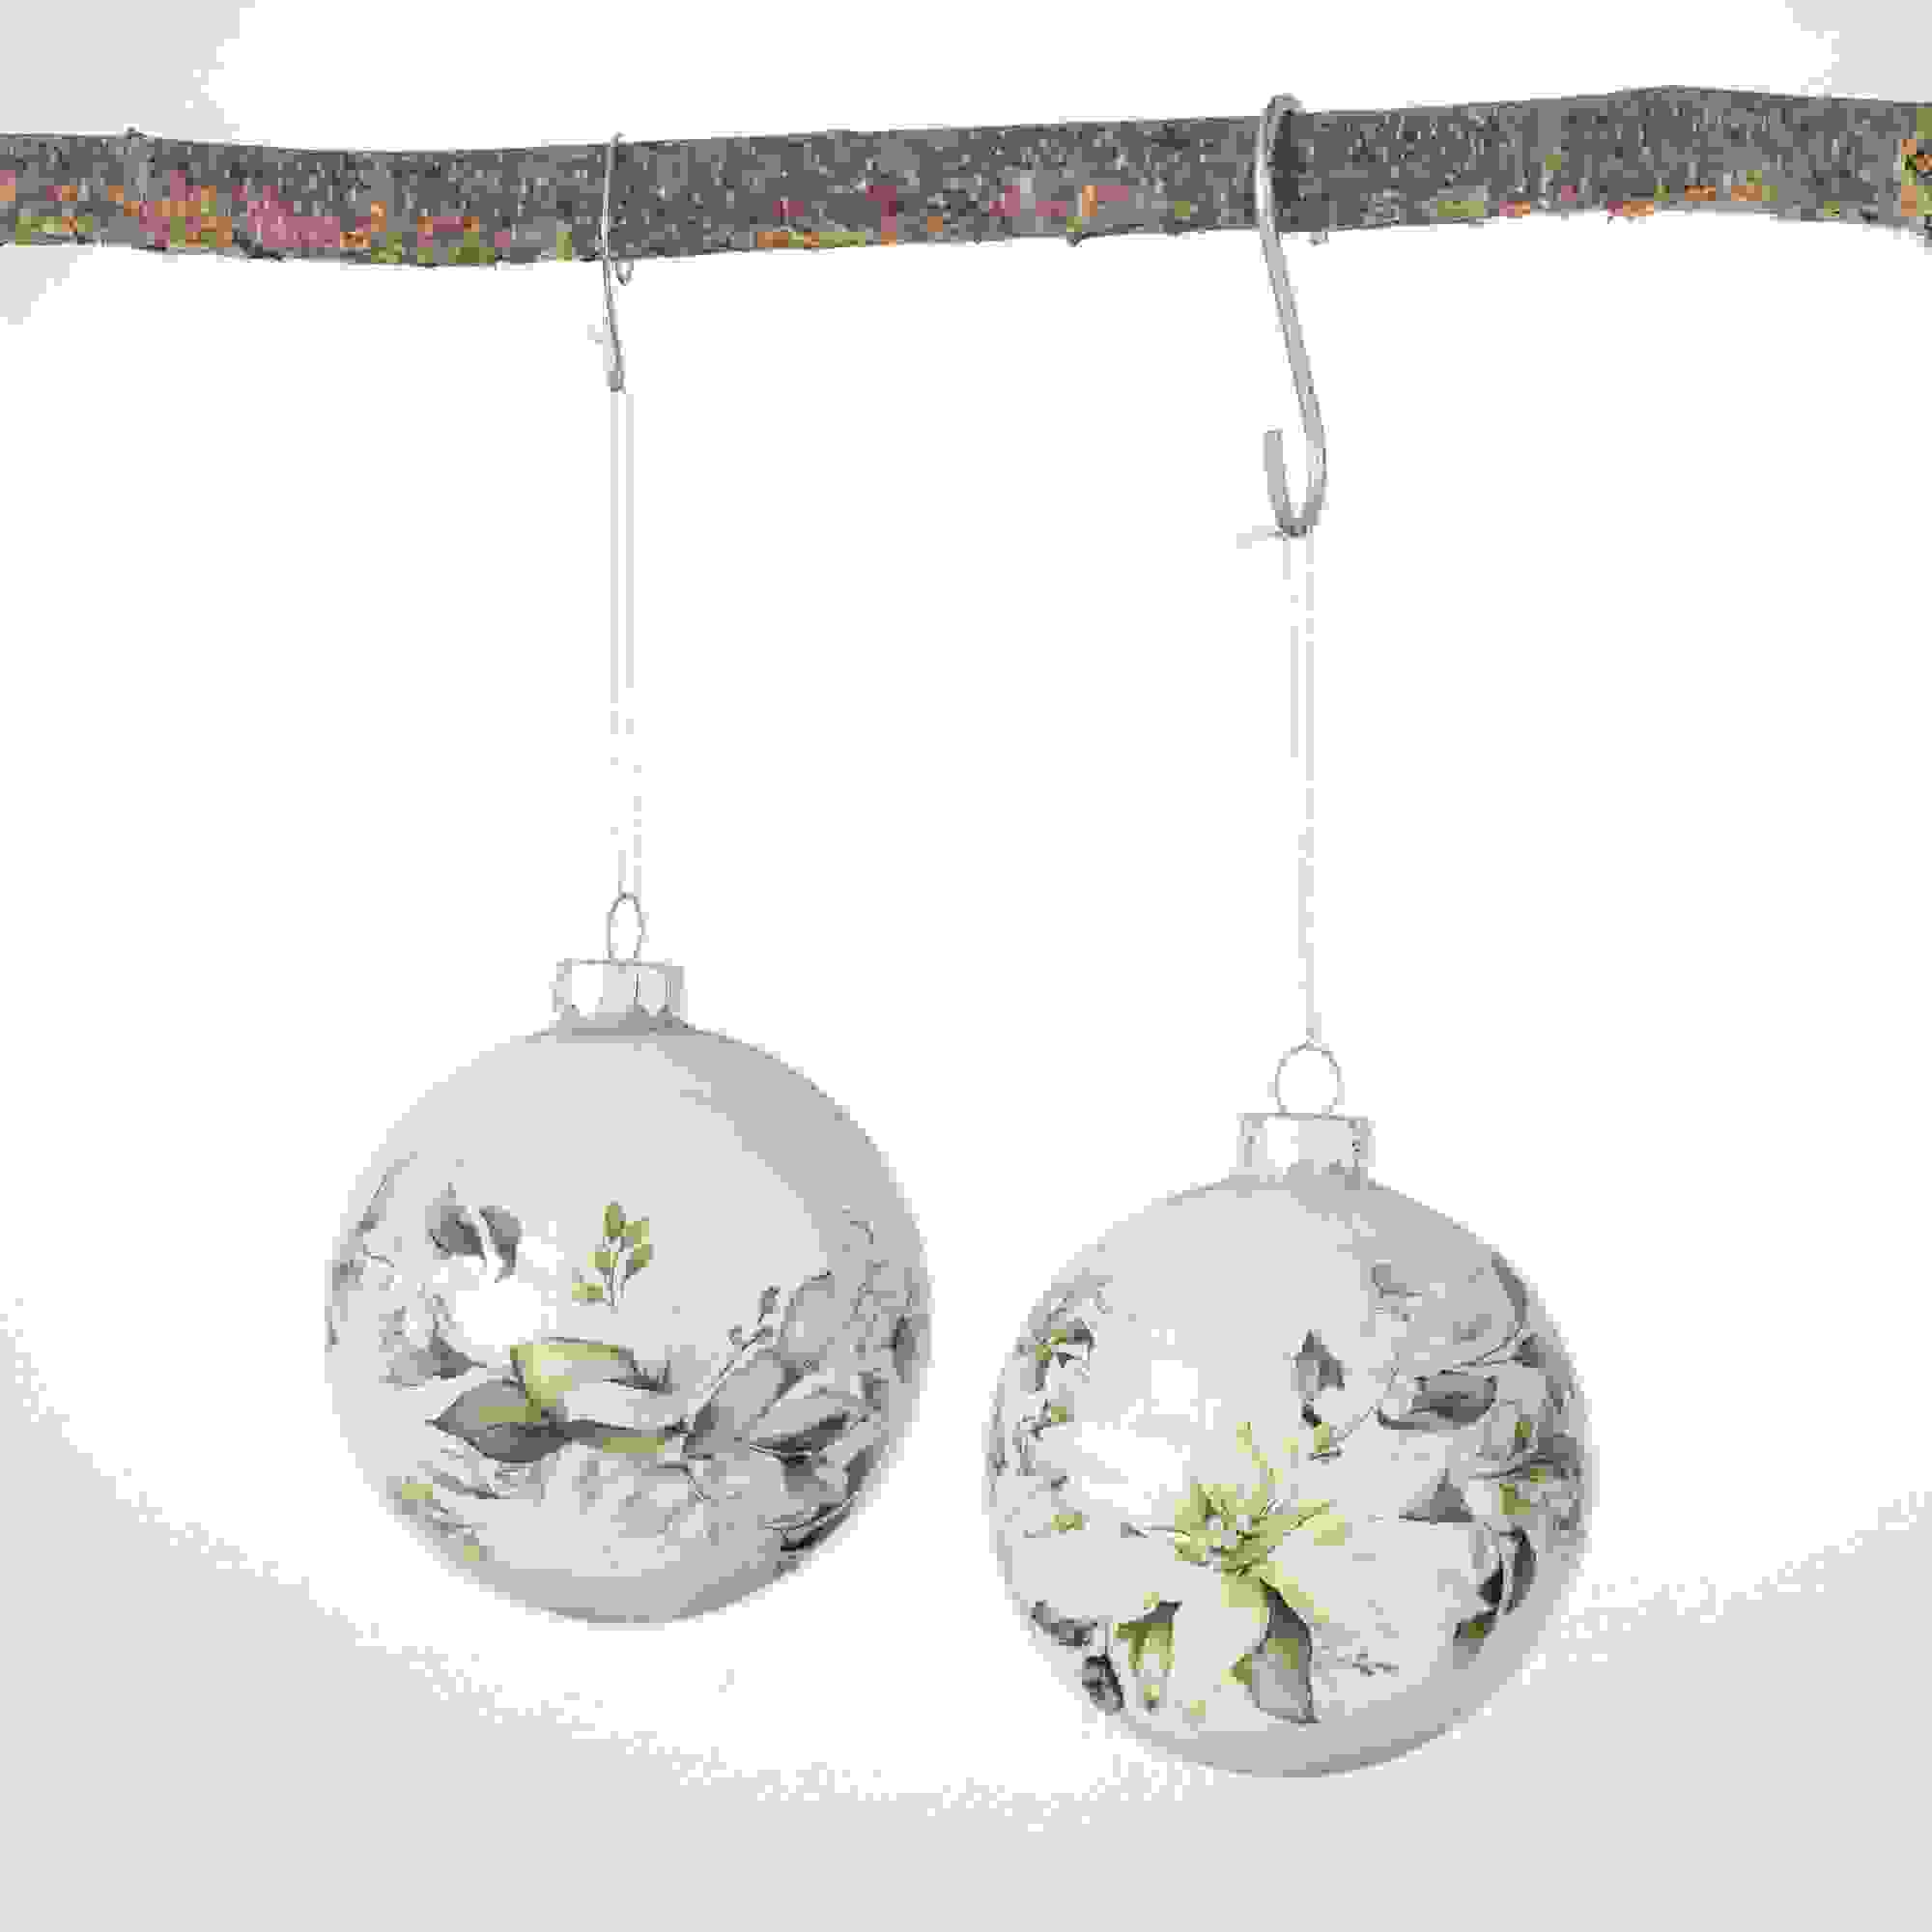 FLORAL BALL ORNAMENT SET OF 2